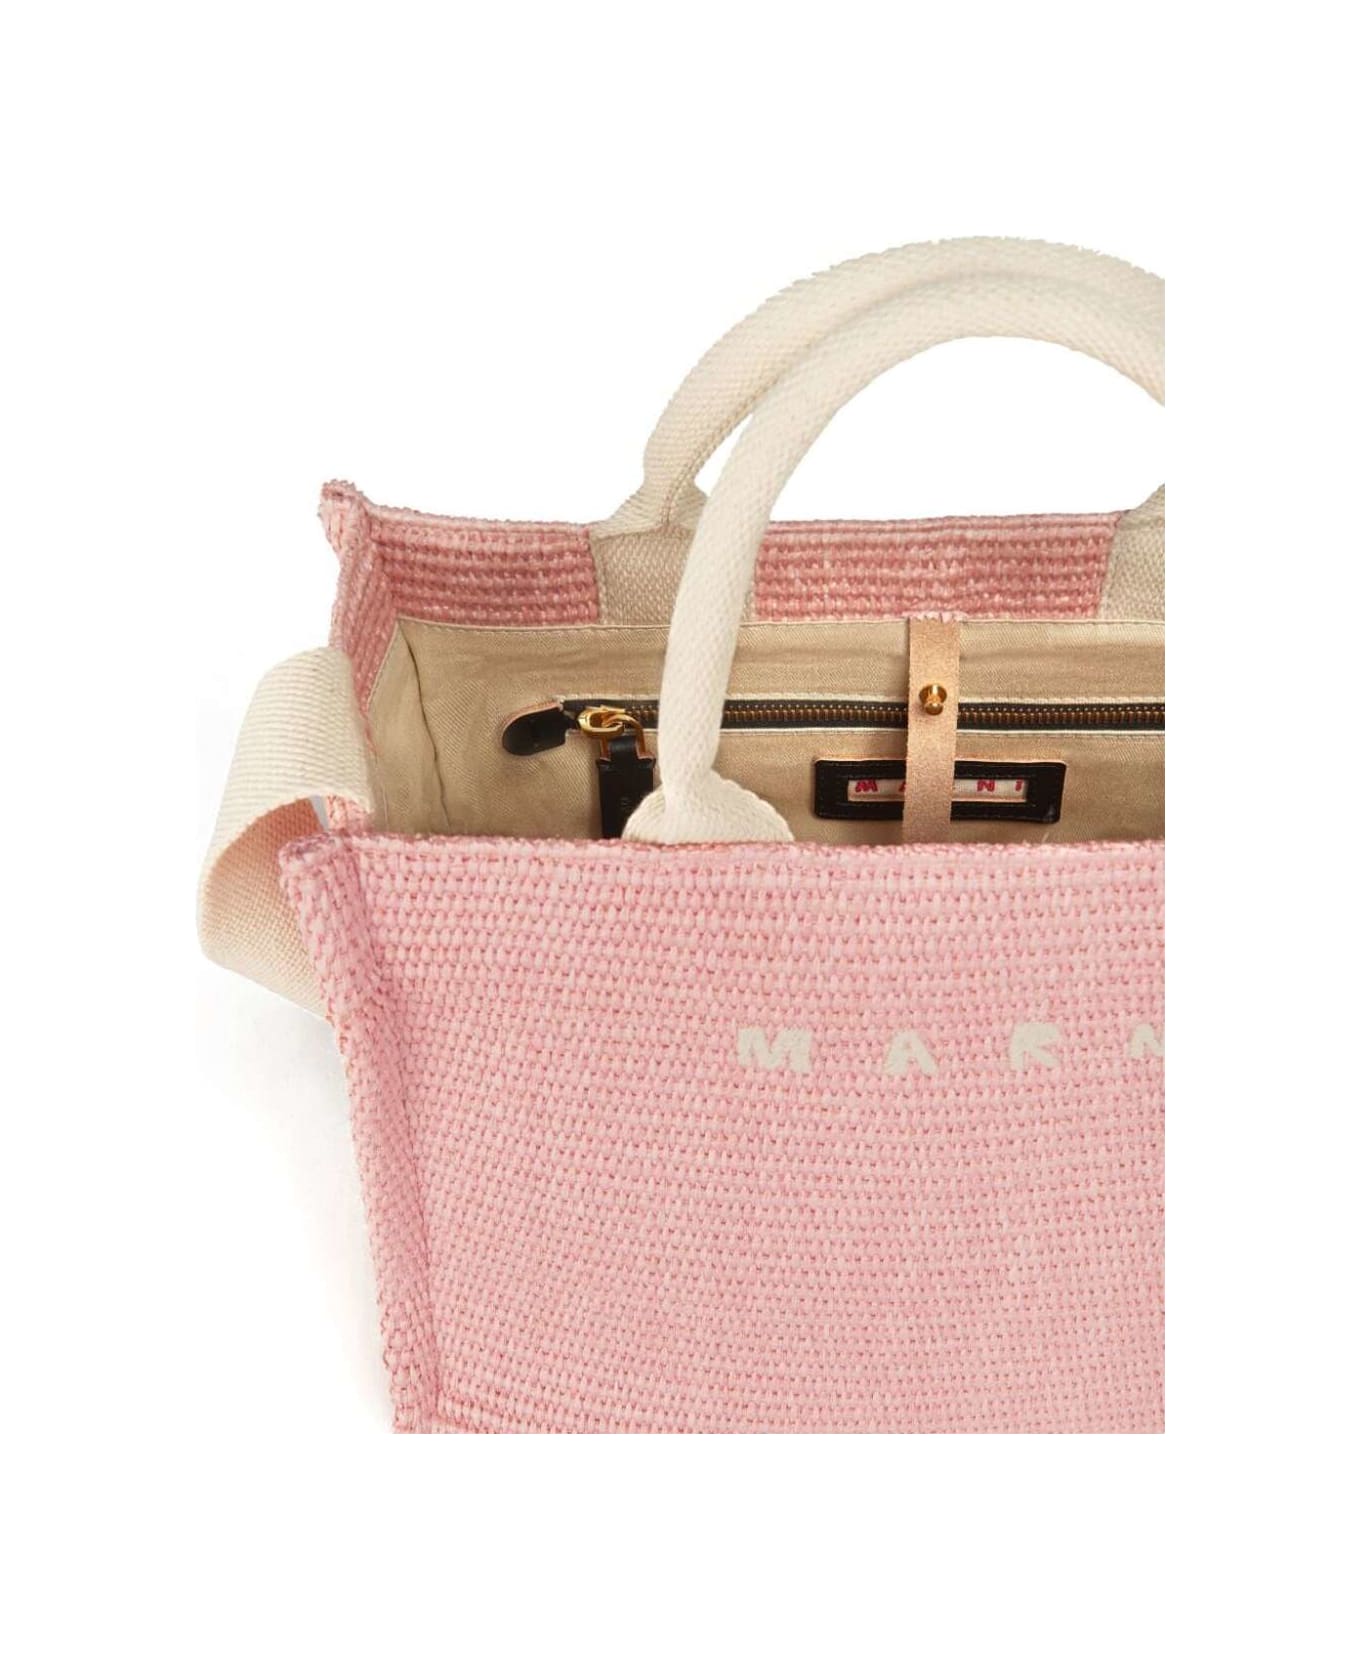 Marni Pink Tote Bag With Logo Embroidery In Rafia Effect Fabric Woman - Pink